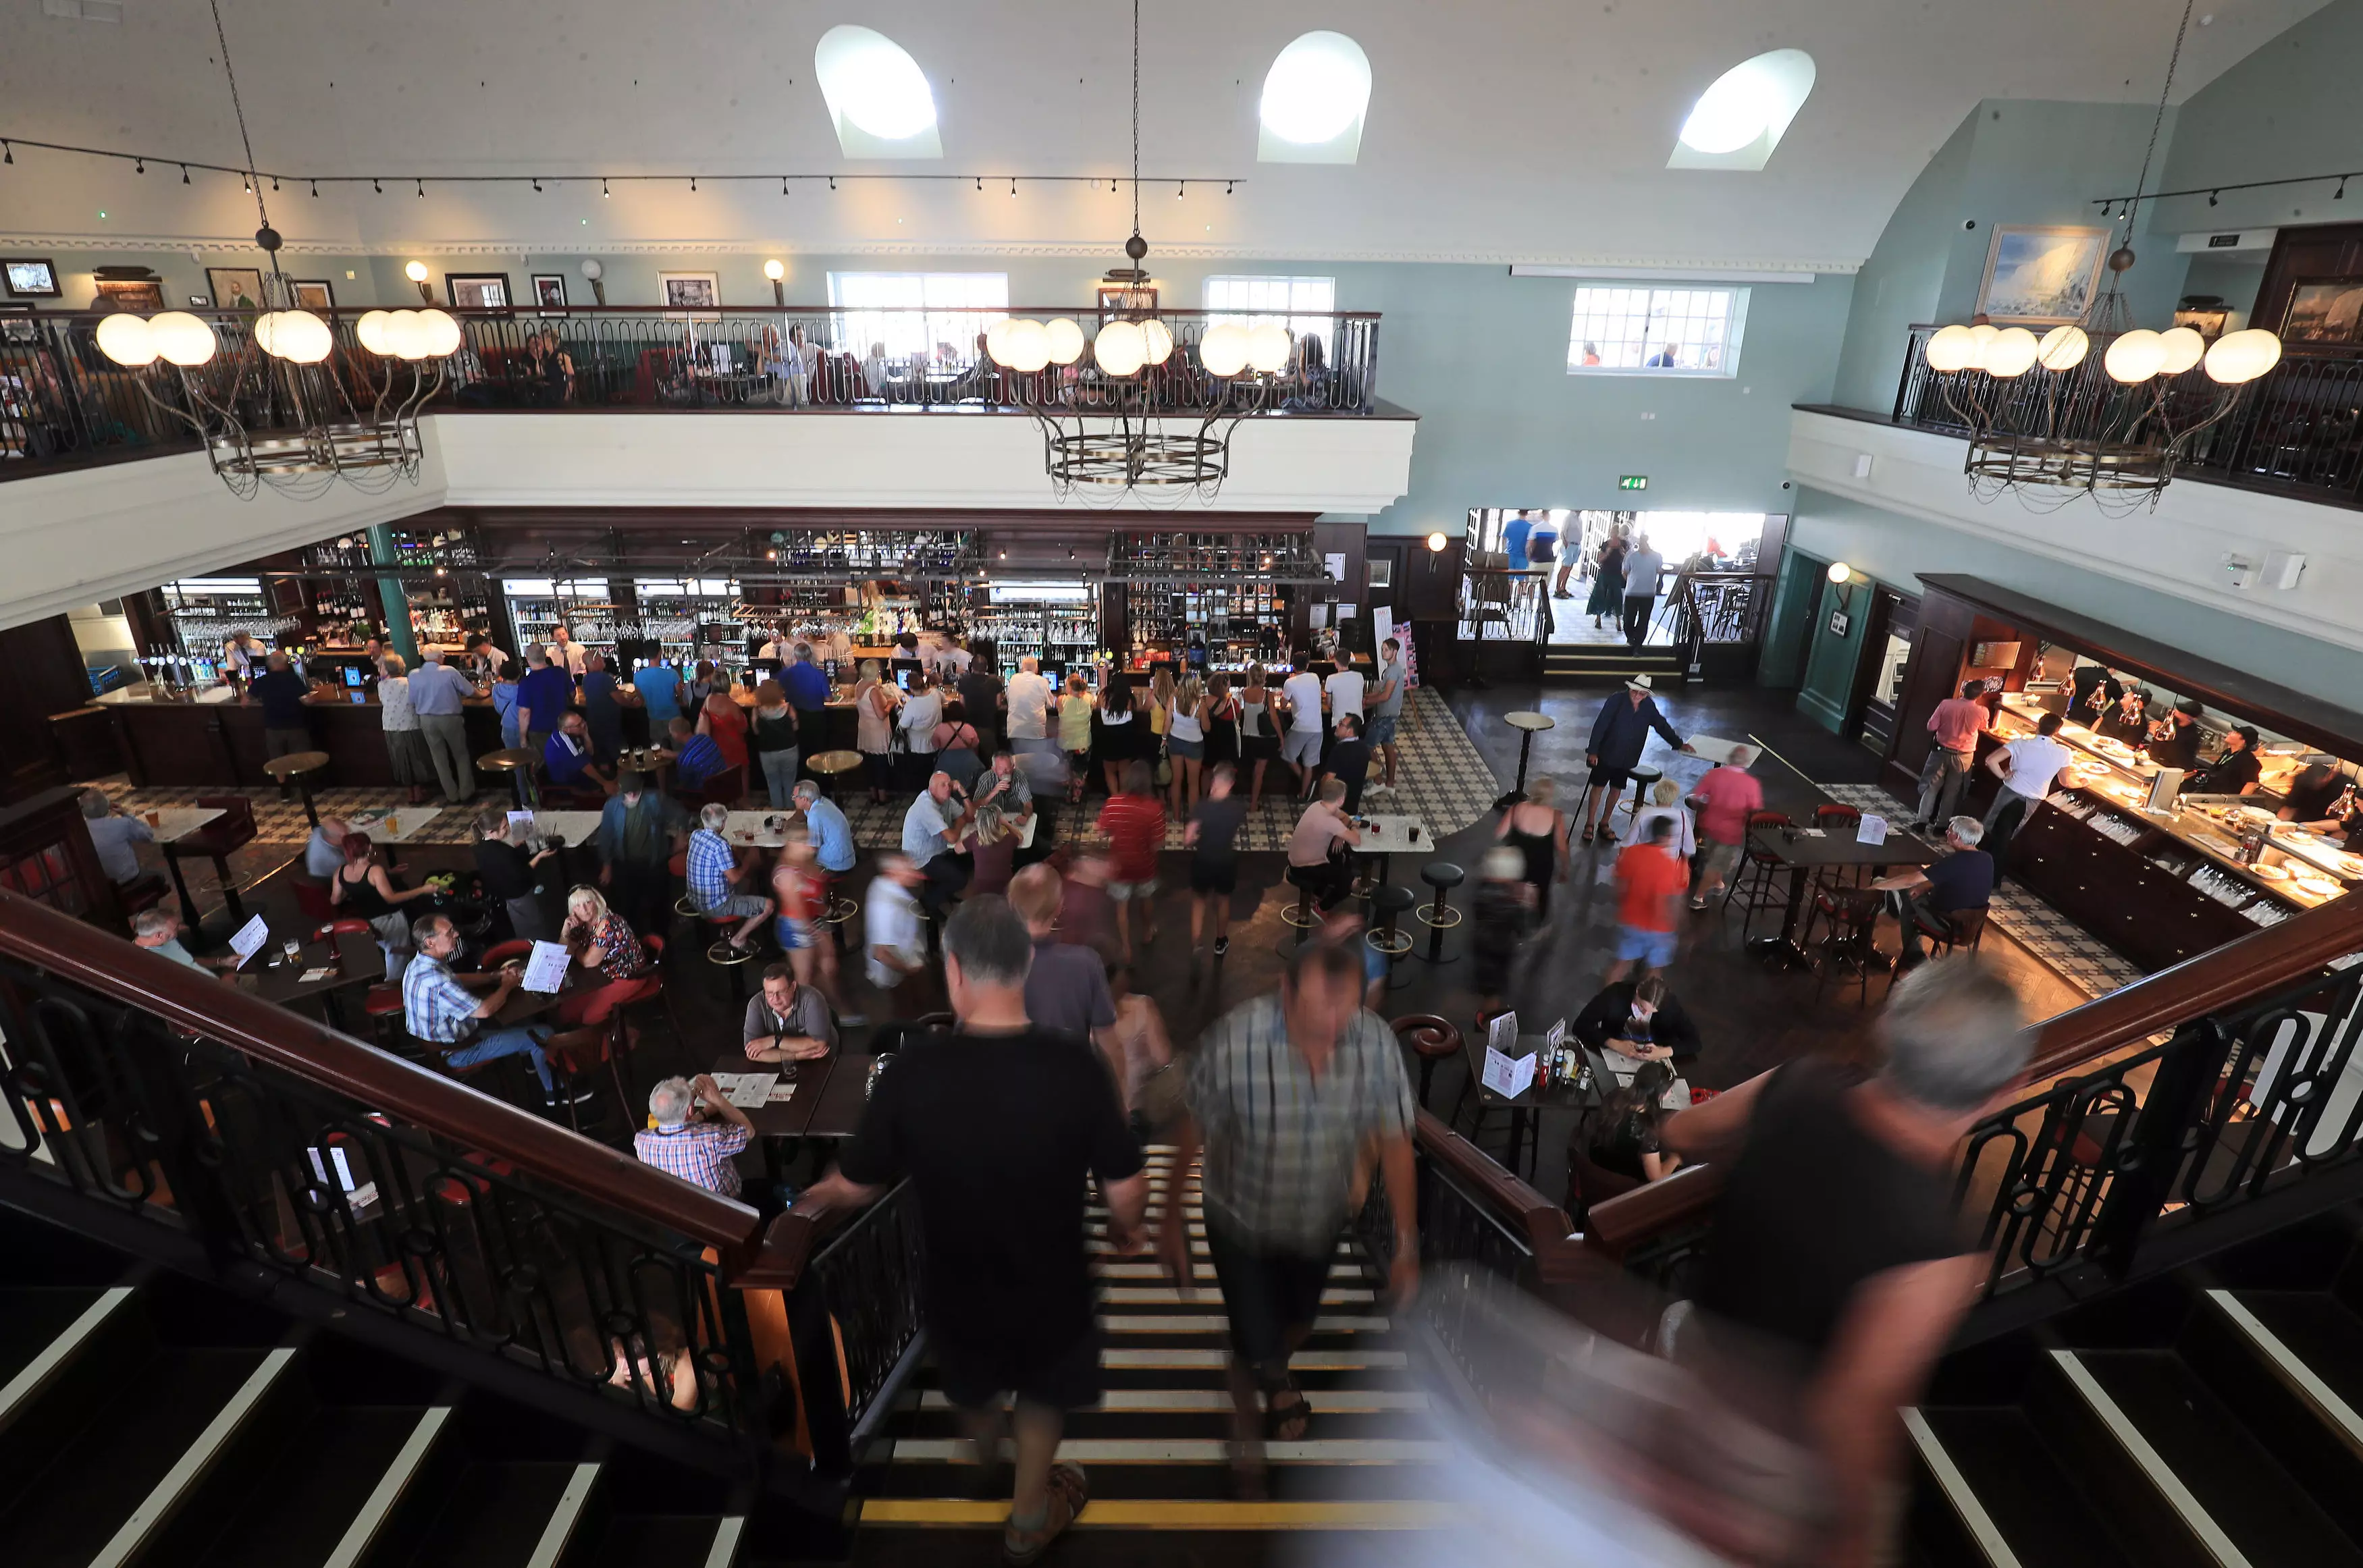 Here's some tips on how not to annoy Wetherspoon staff.